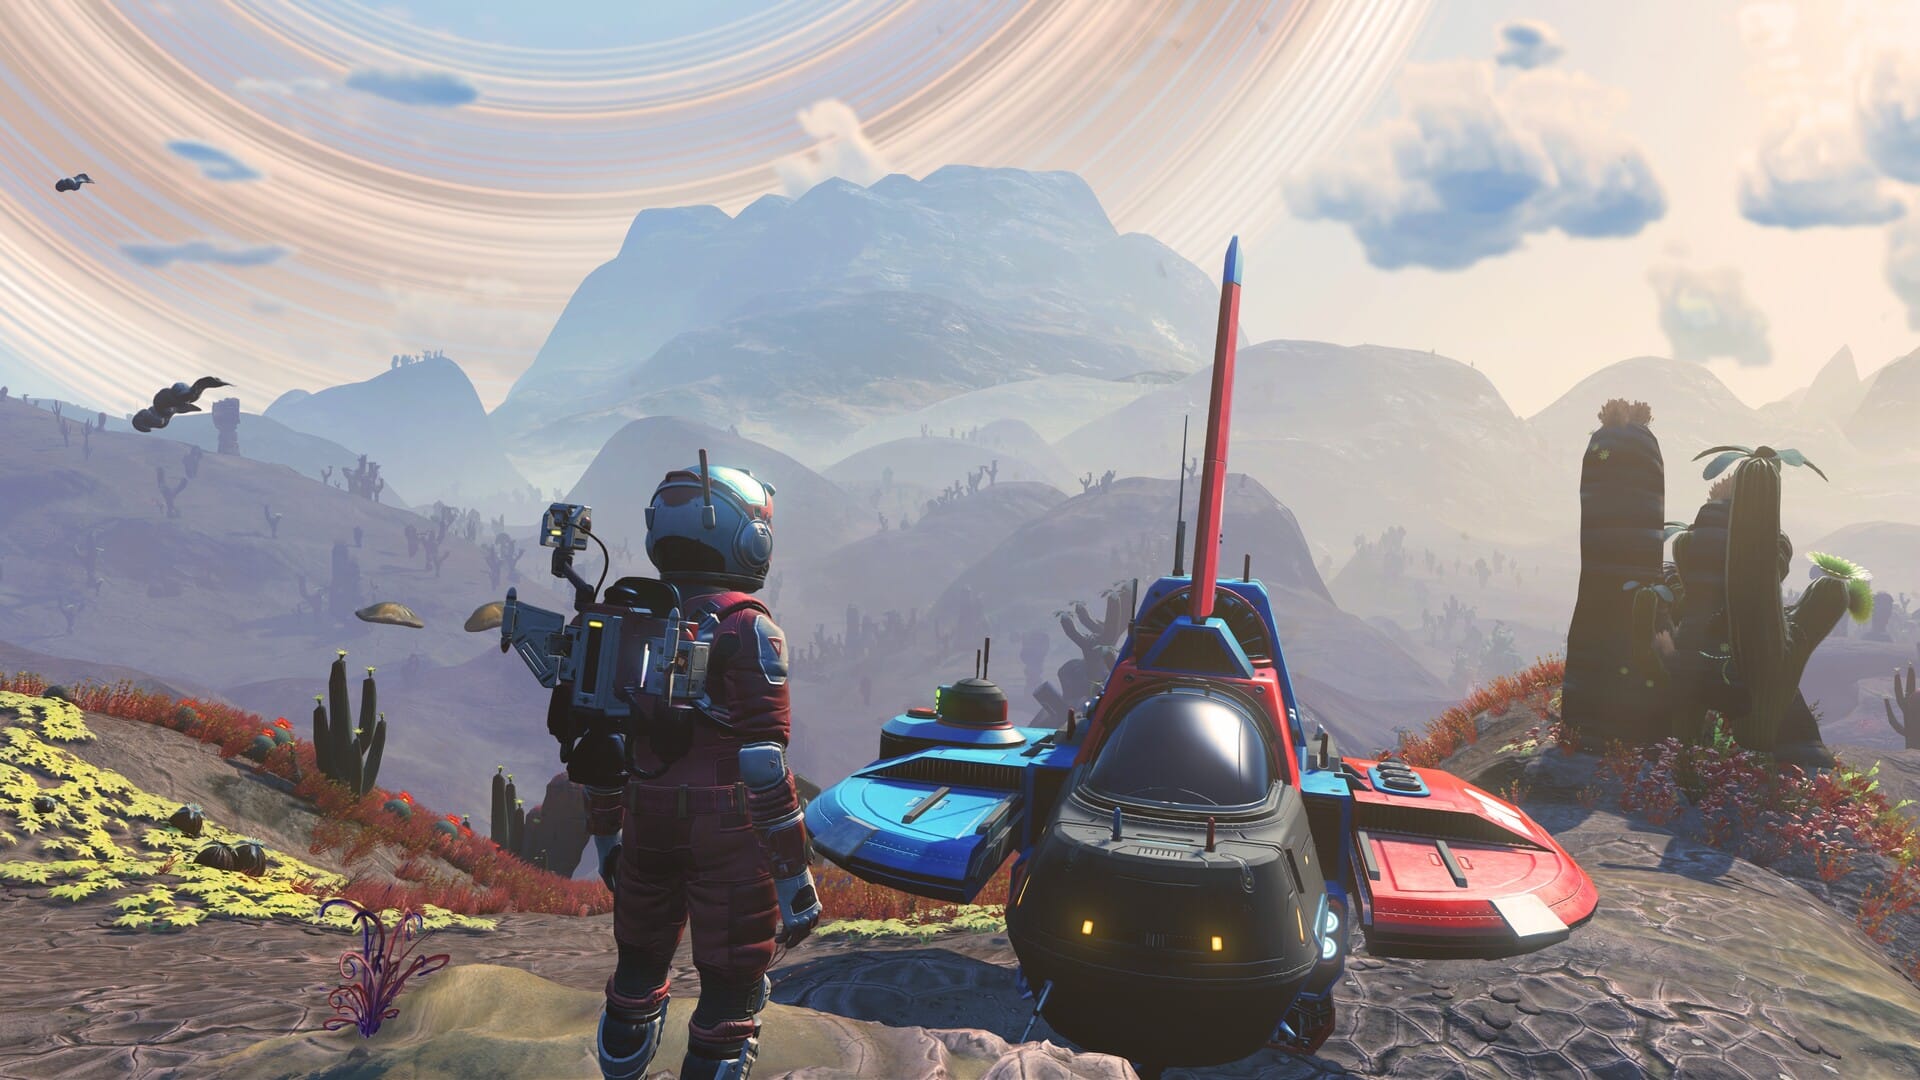 No Man's Sky Update 4.12 Released, Includes Fixes for Fractal Patch